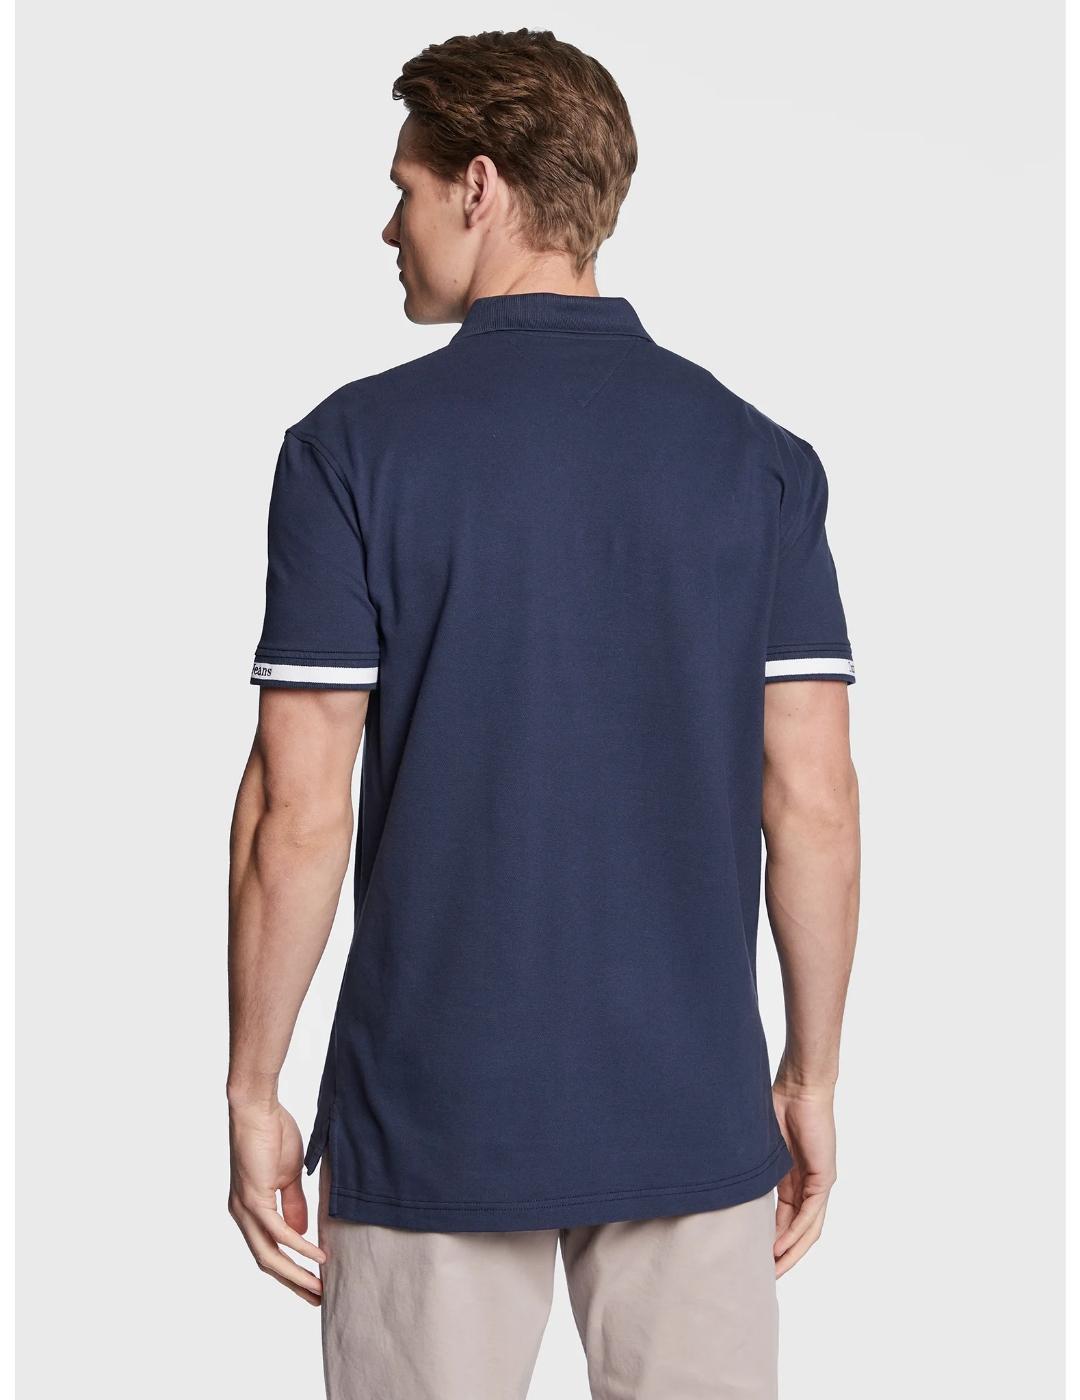 Polo Tommy Jeans essential marino para hombre